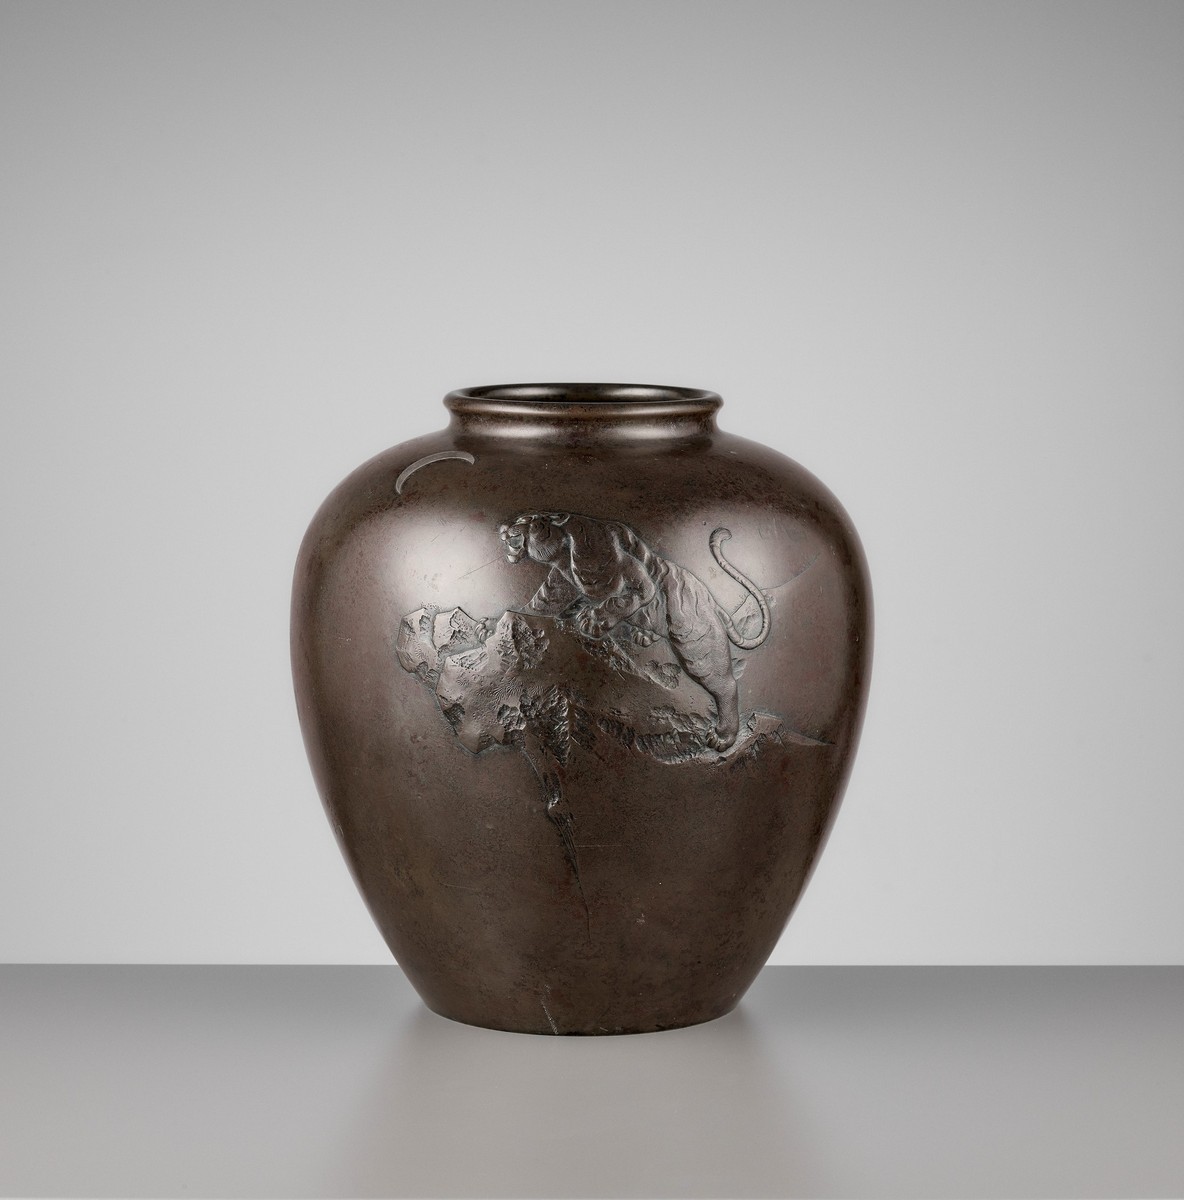 SEIGYOKU: A MASSIVE SILVER-INLAID BRONZE VASE WITH A TIGER AND CRESCENT MOON By Seigyoku, signed - Image 3 of 9